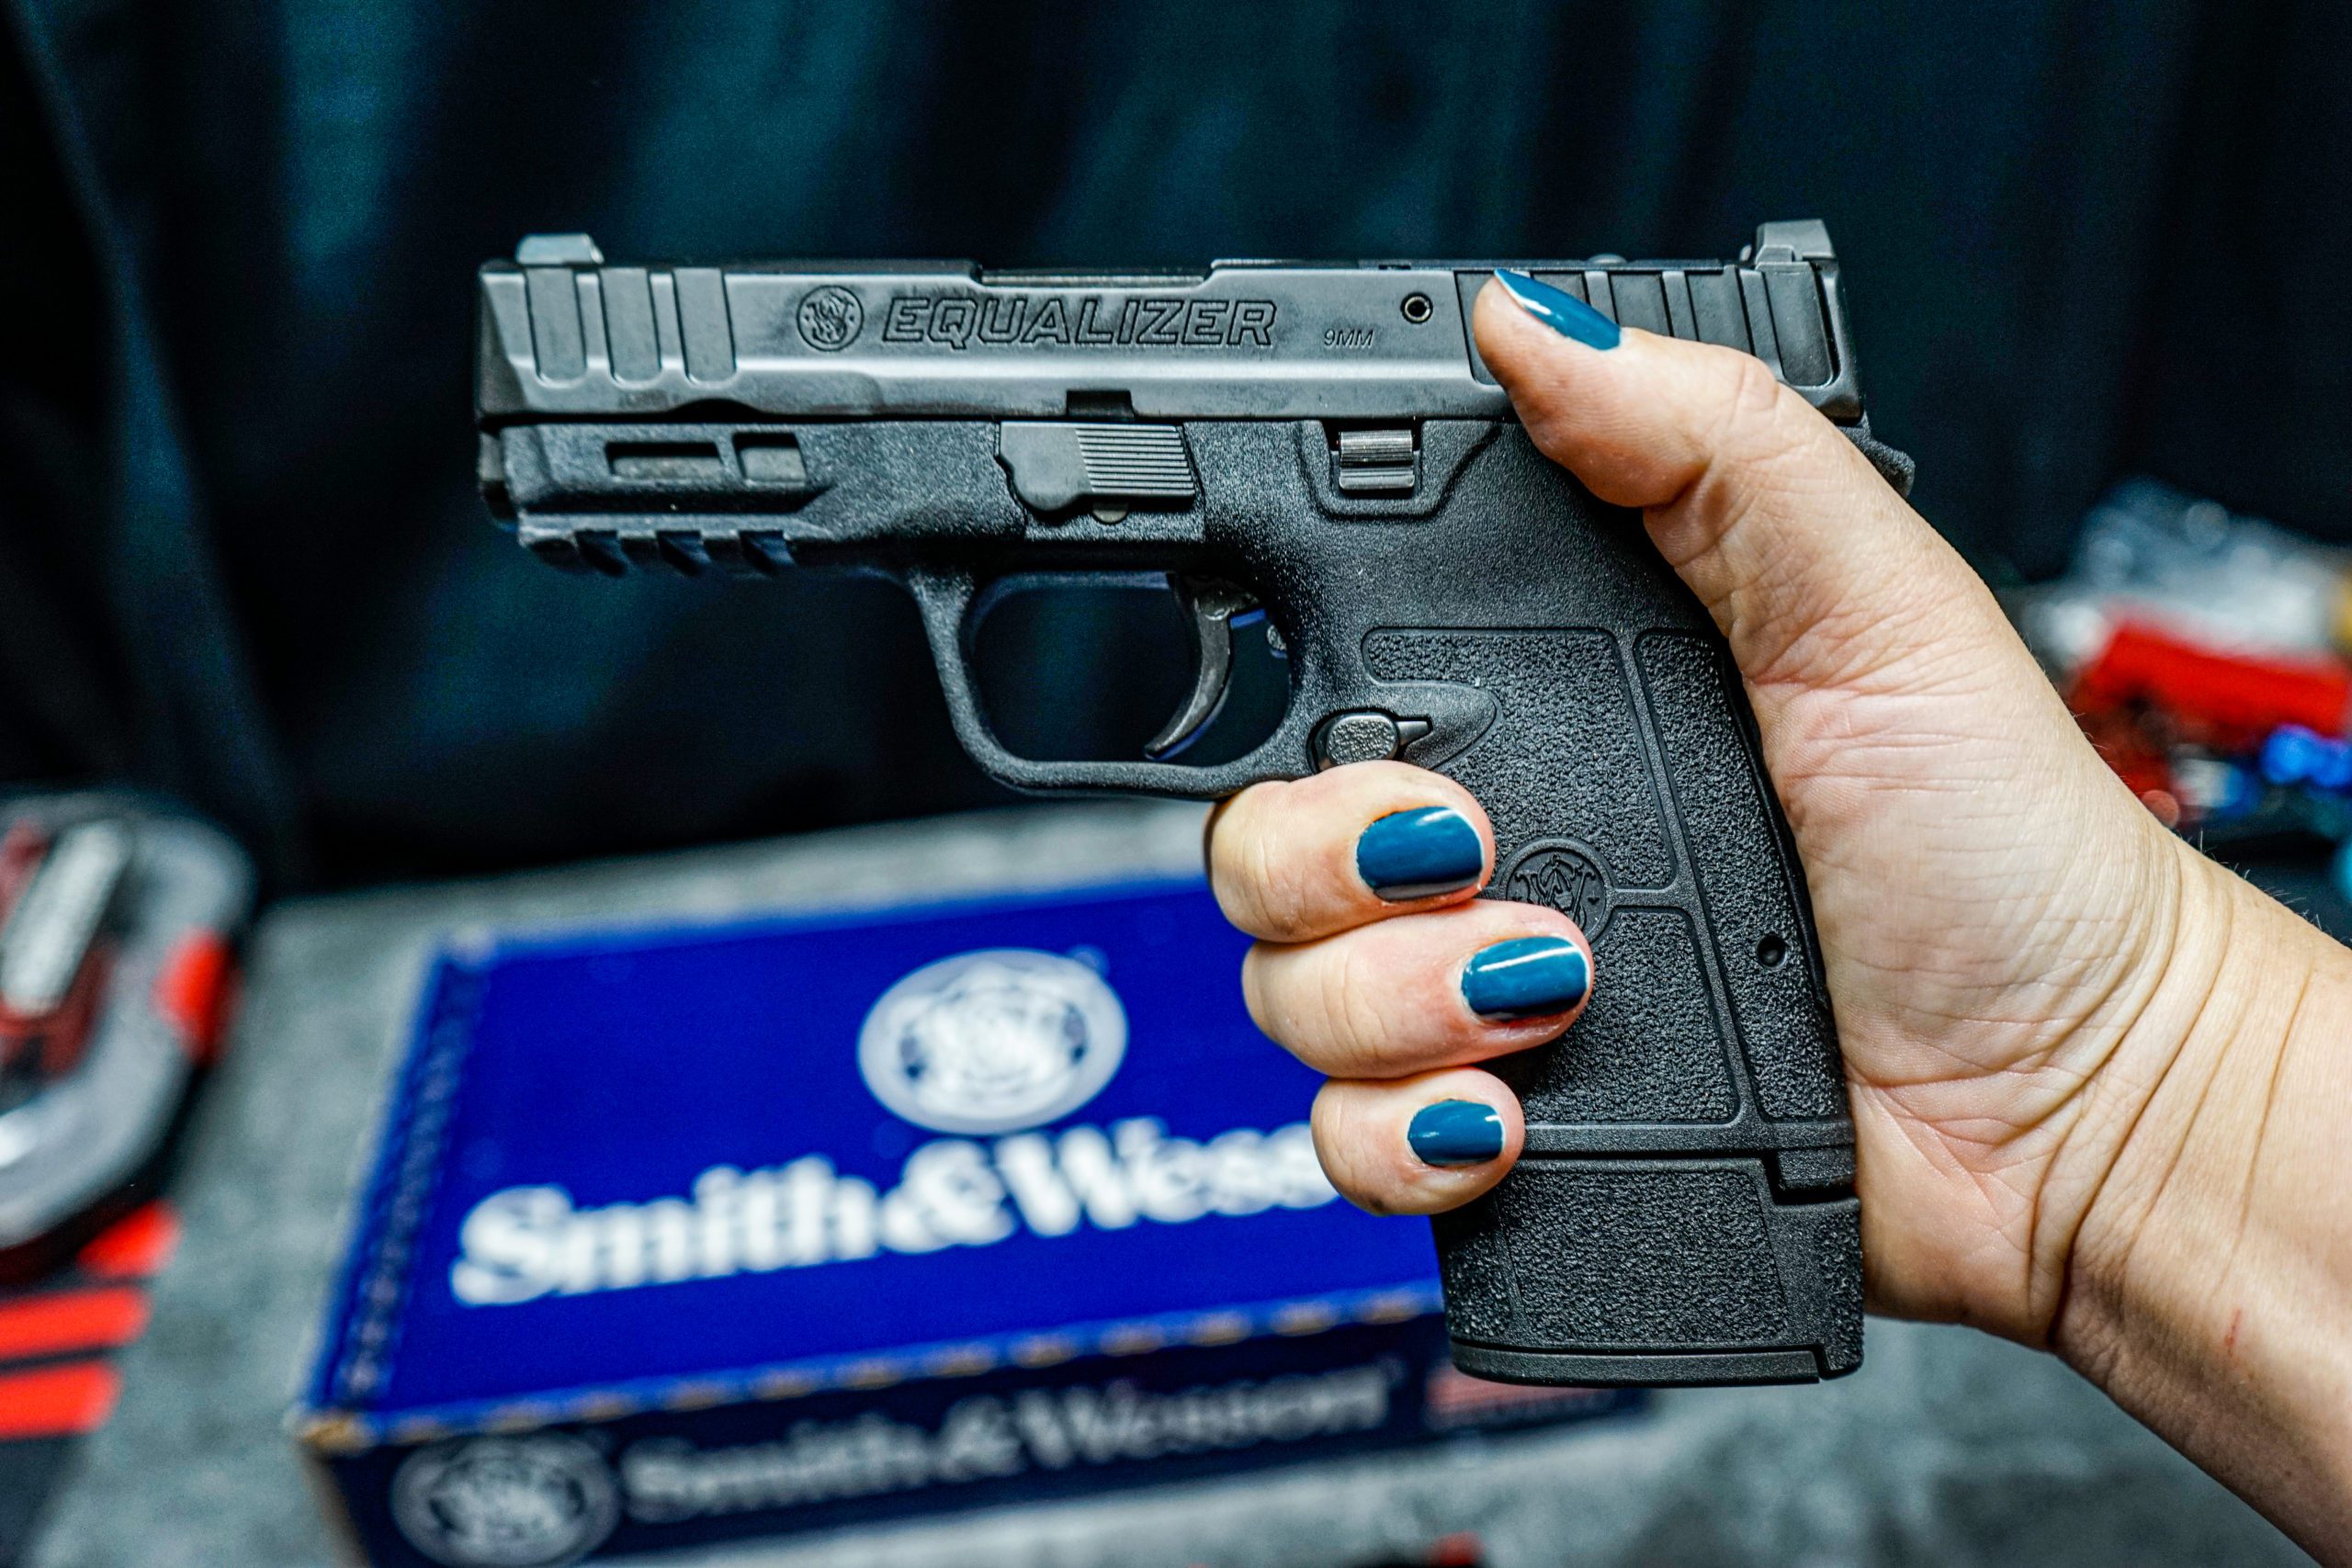 Smith & Wesson Equalizer Review